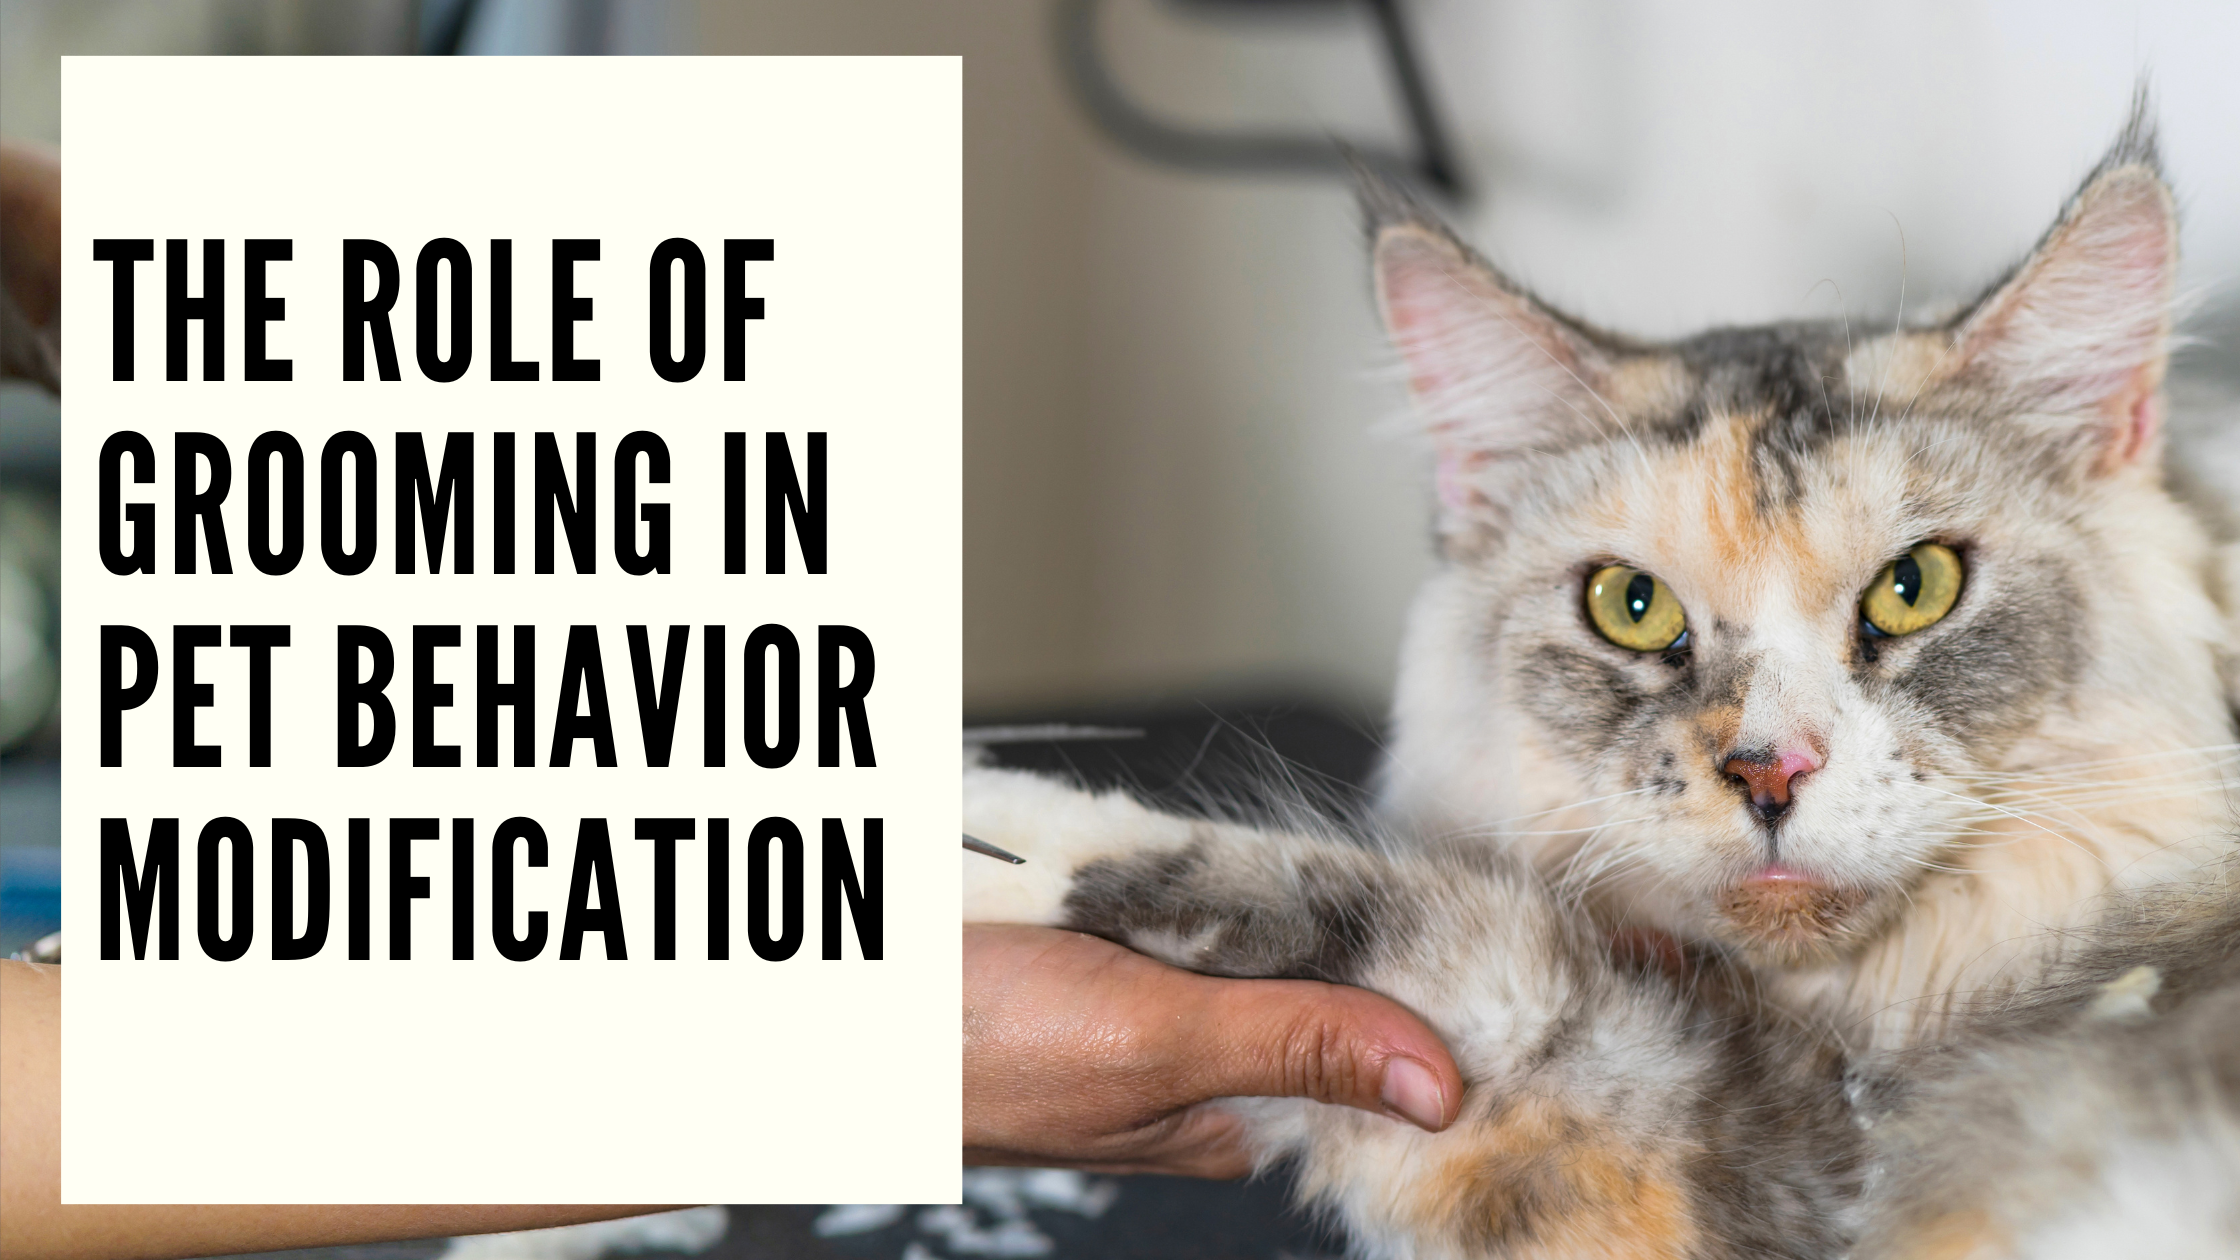 The Role of Grooming in Pet Behavior Modification